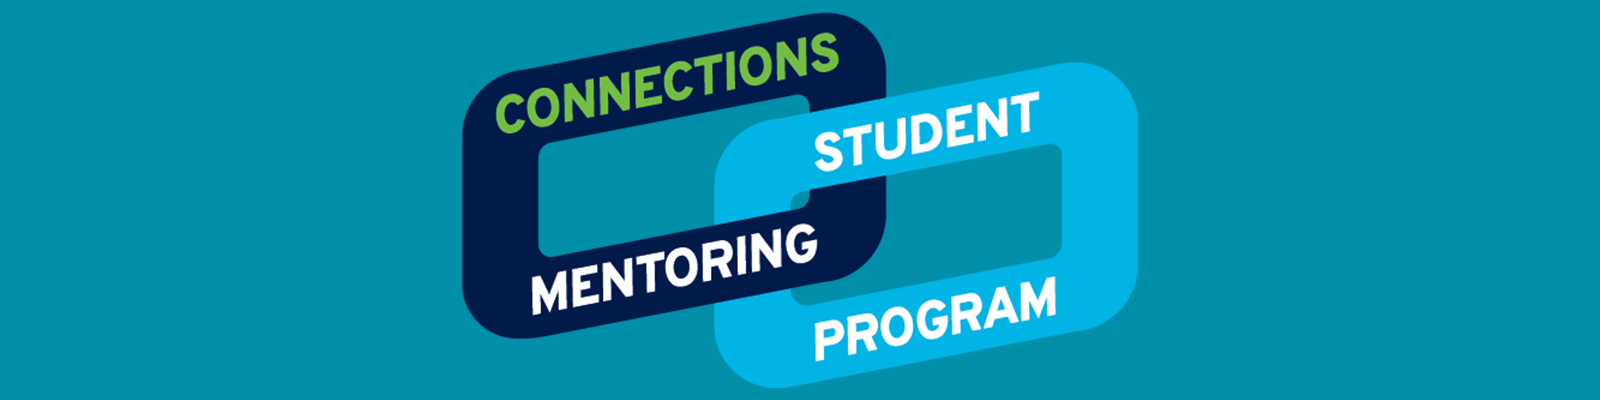 Connections Students Mentoring Program Logo